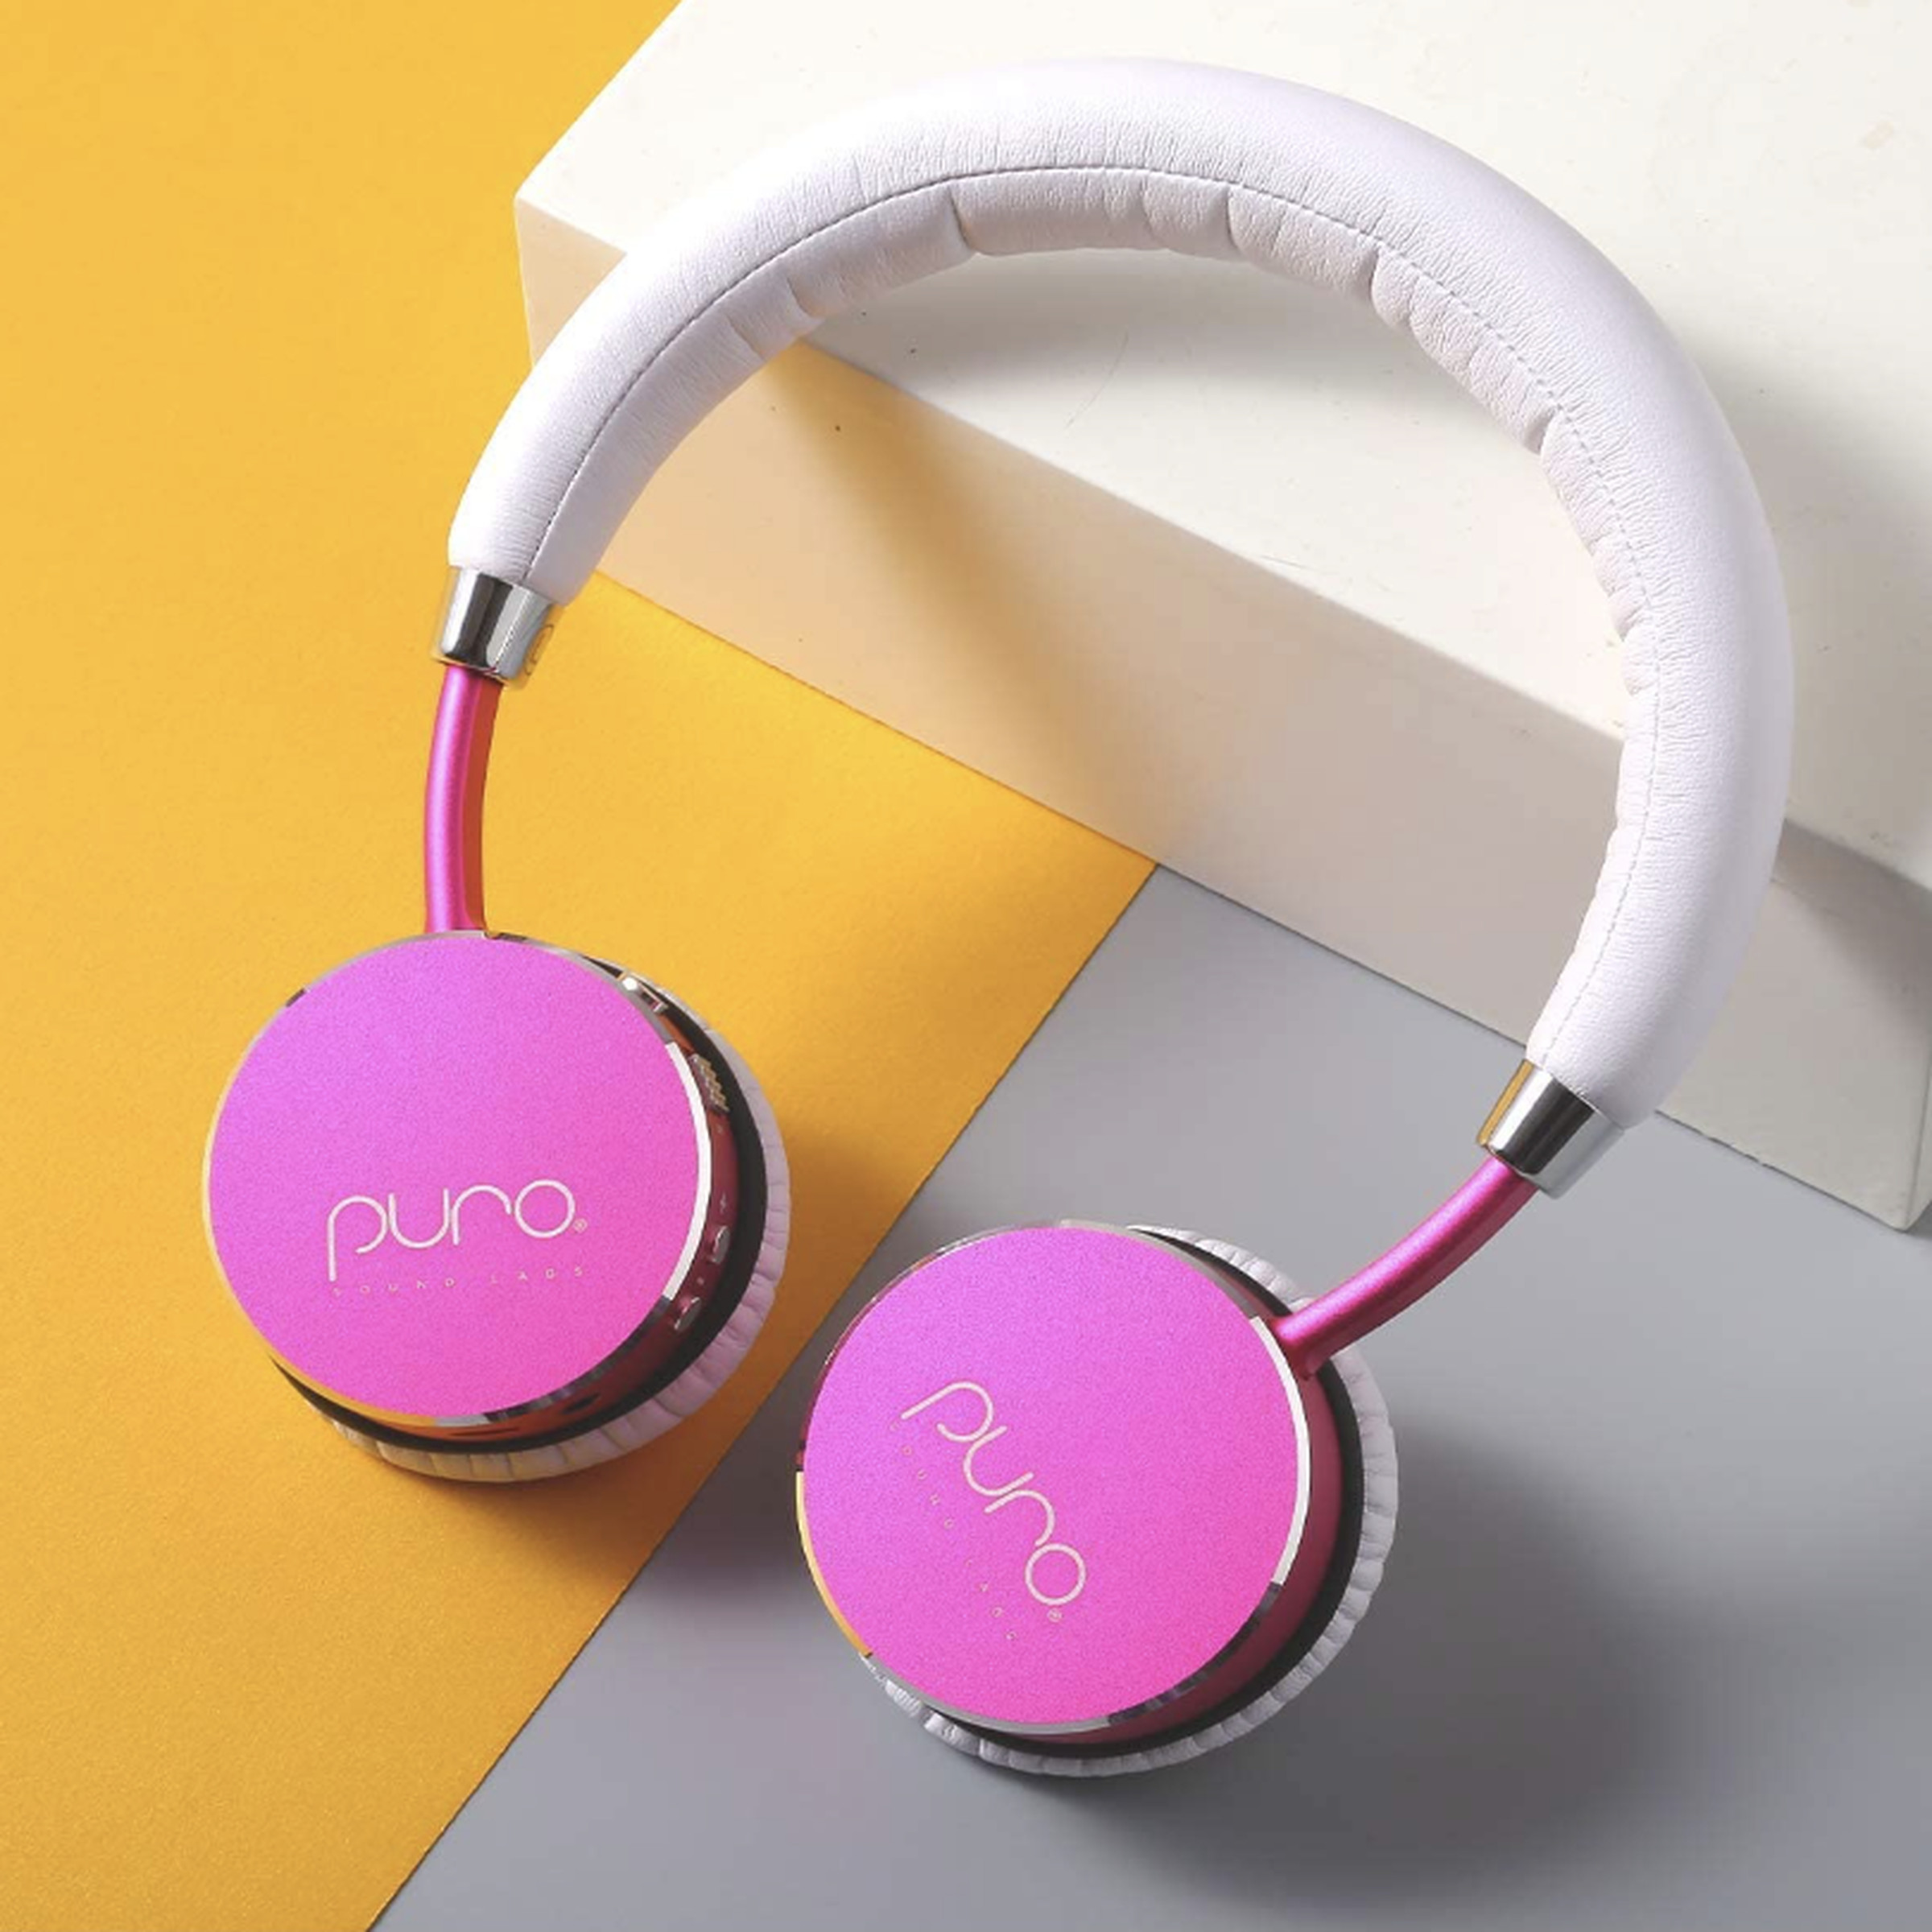 Headphones with white headband and pink over-the-ear cushions on a yellow, gray and white background.